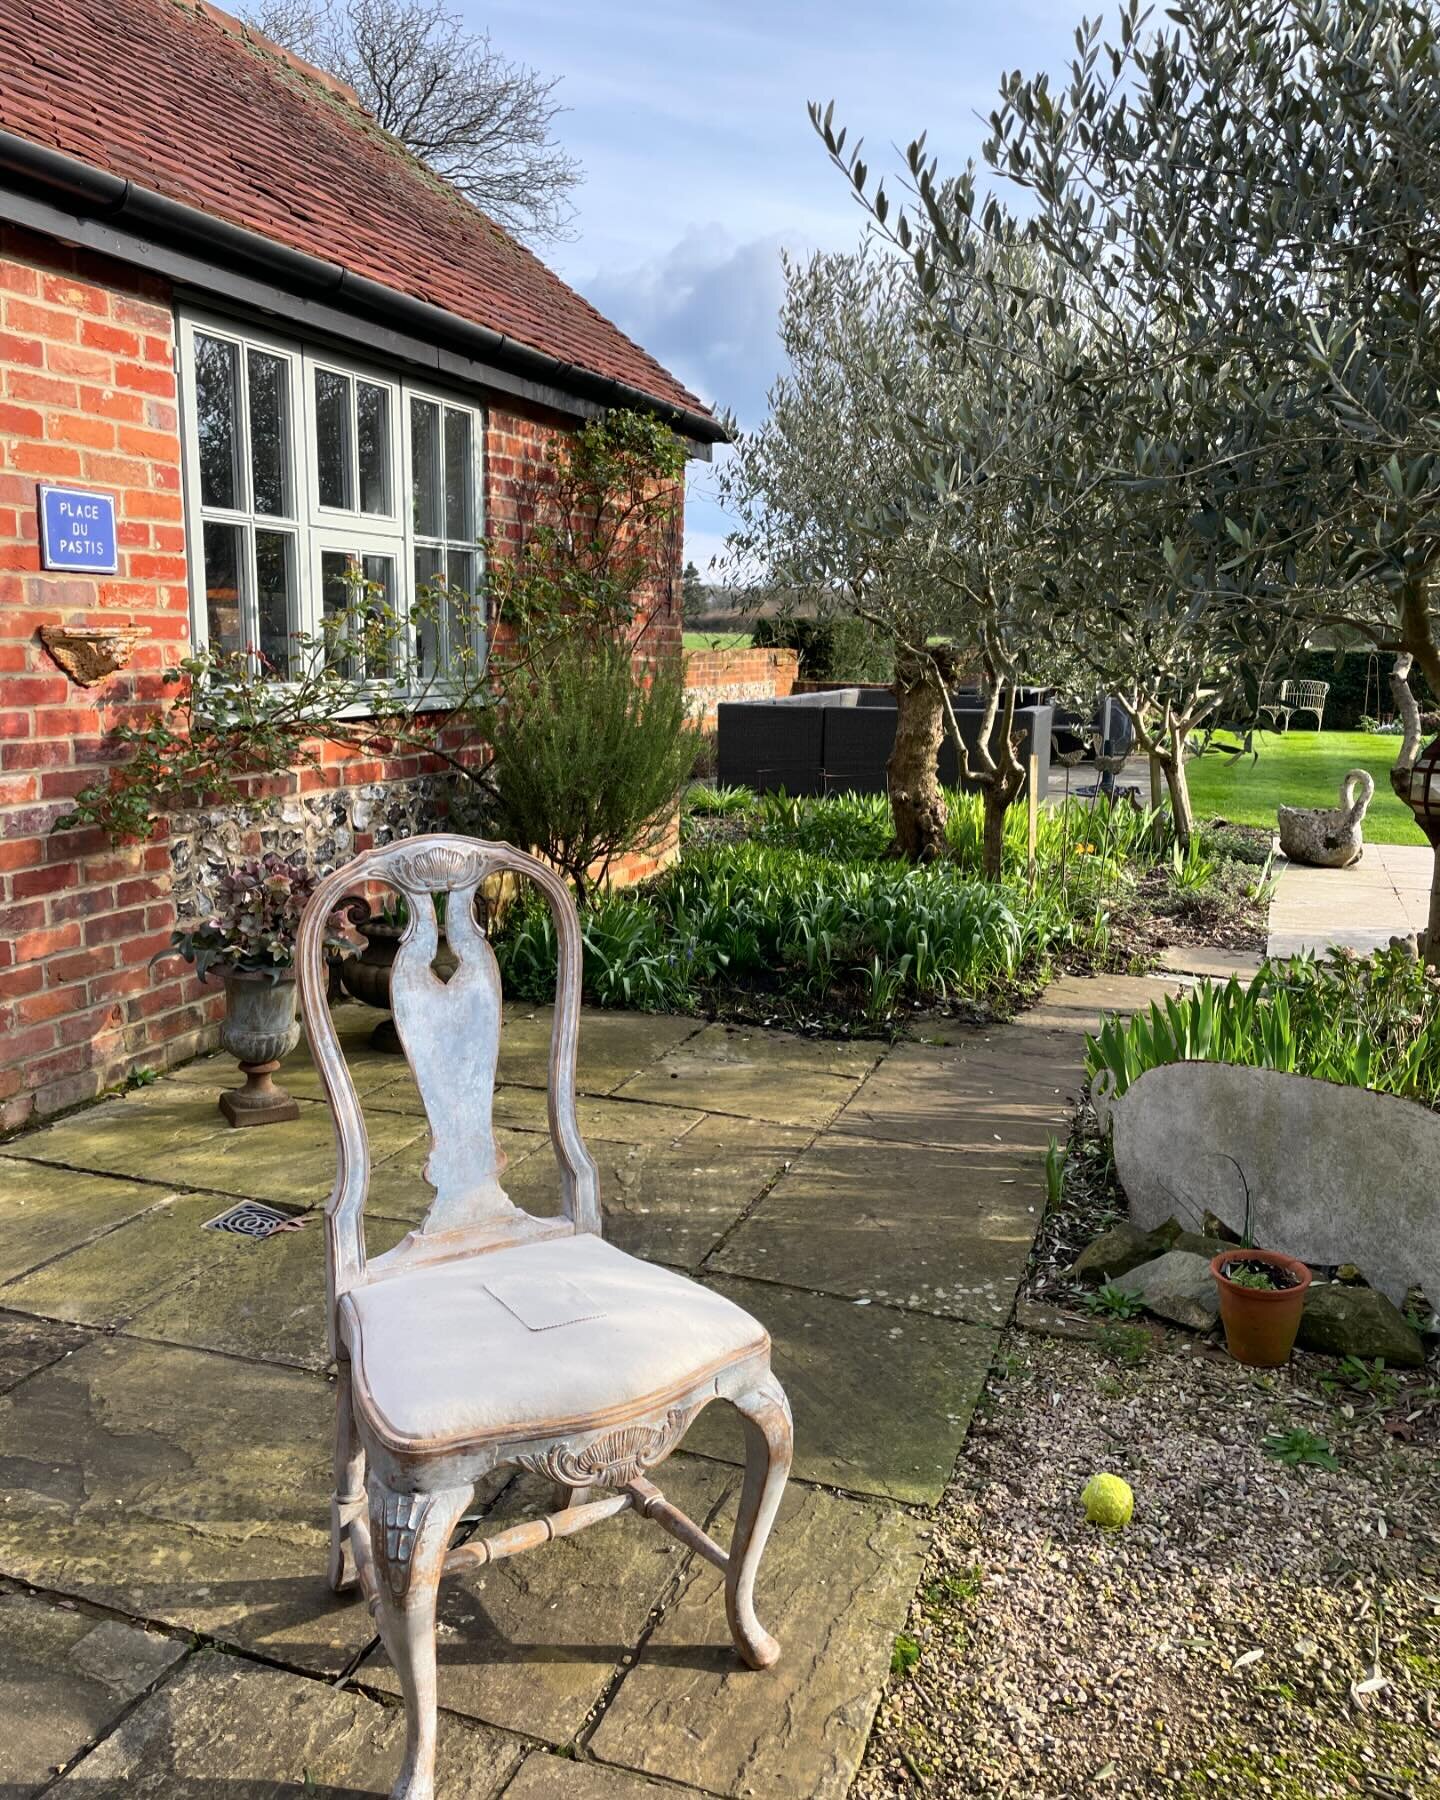 Well, today I am sitting with my doors open, the sun is shining, my client has chosen the fabric for her chairs and we have @sarahravensgarden and @arthurparkinson_ doing their garden inspiring courses here at our base @bixmanor so all is good! And t